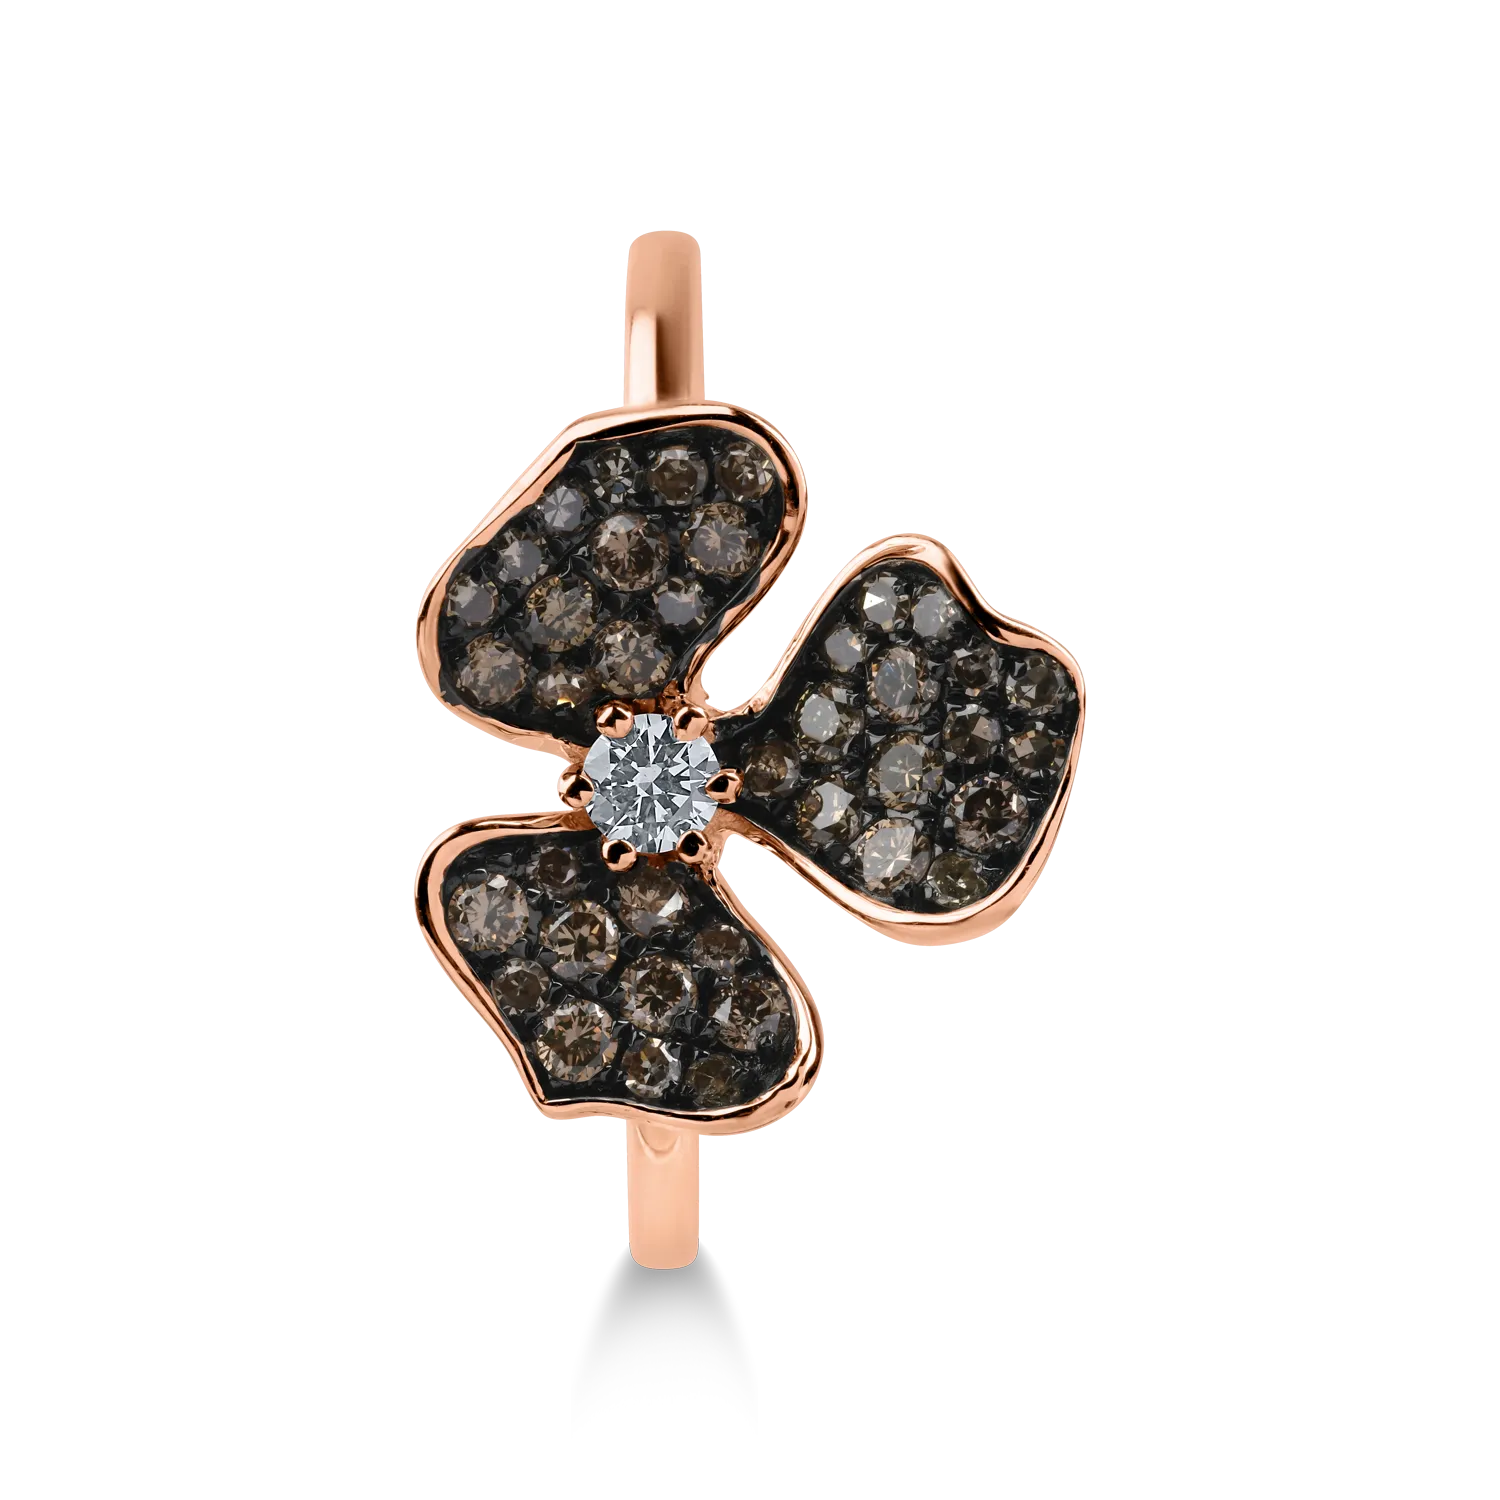 Rose gold ring with 0.362ct brown diamonds and 0.062ct clear diamonds